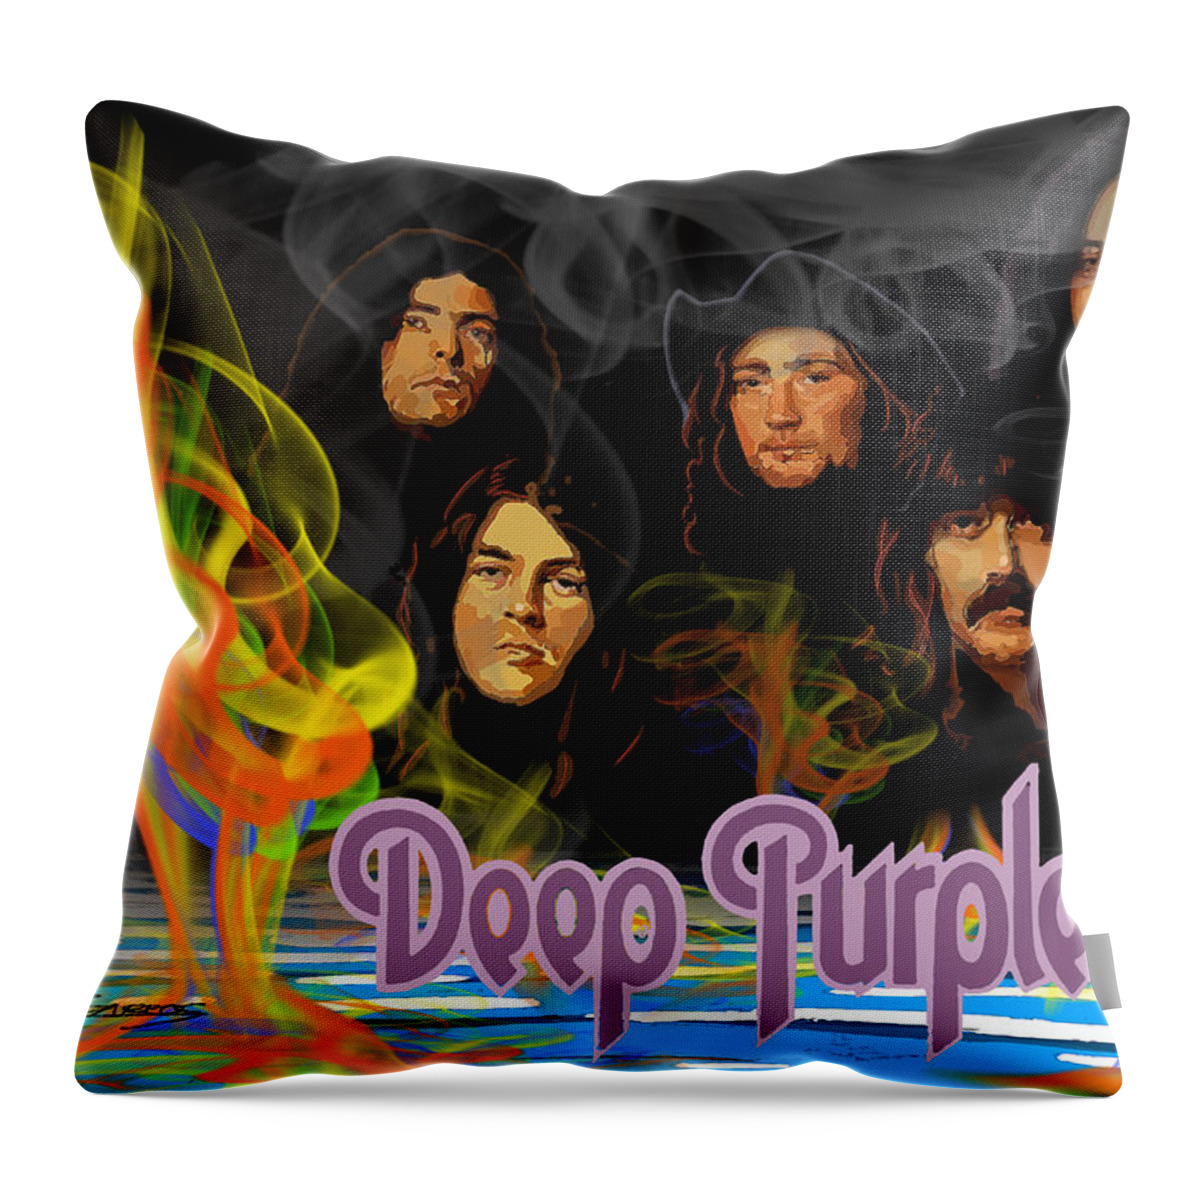 Rock�n Roll Throw Pillow featuring the digital art Smoke On The Water by Nelson Barros